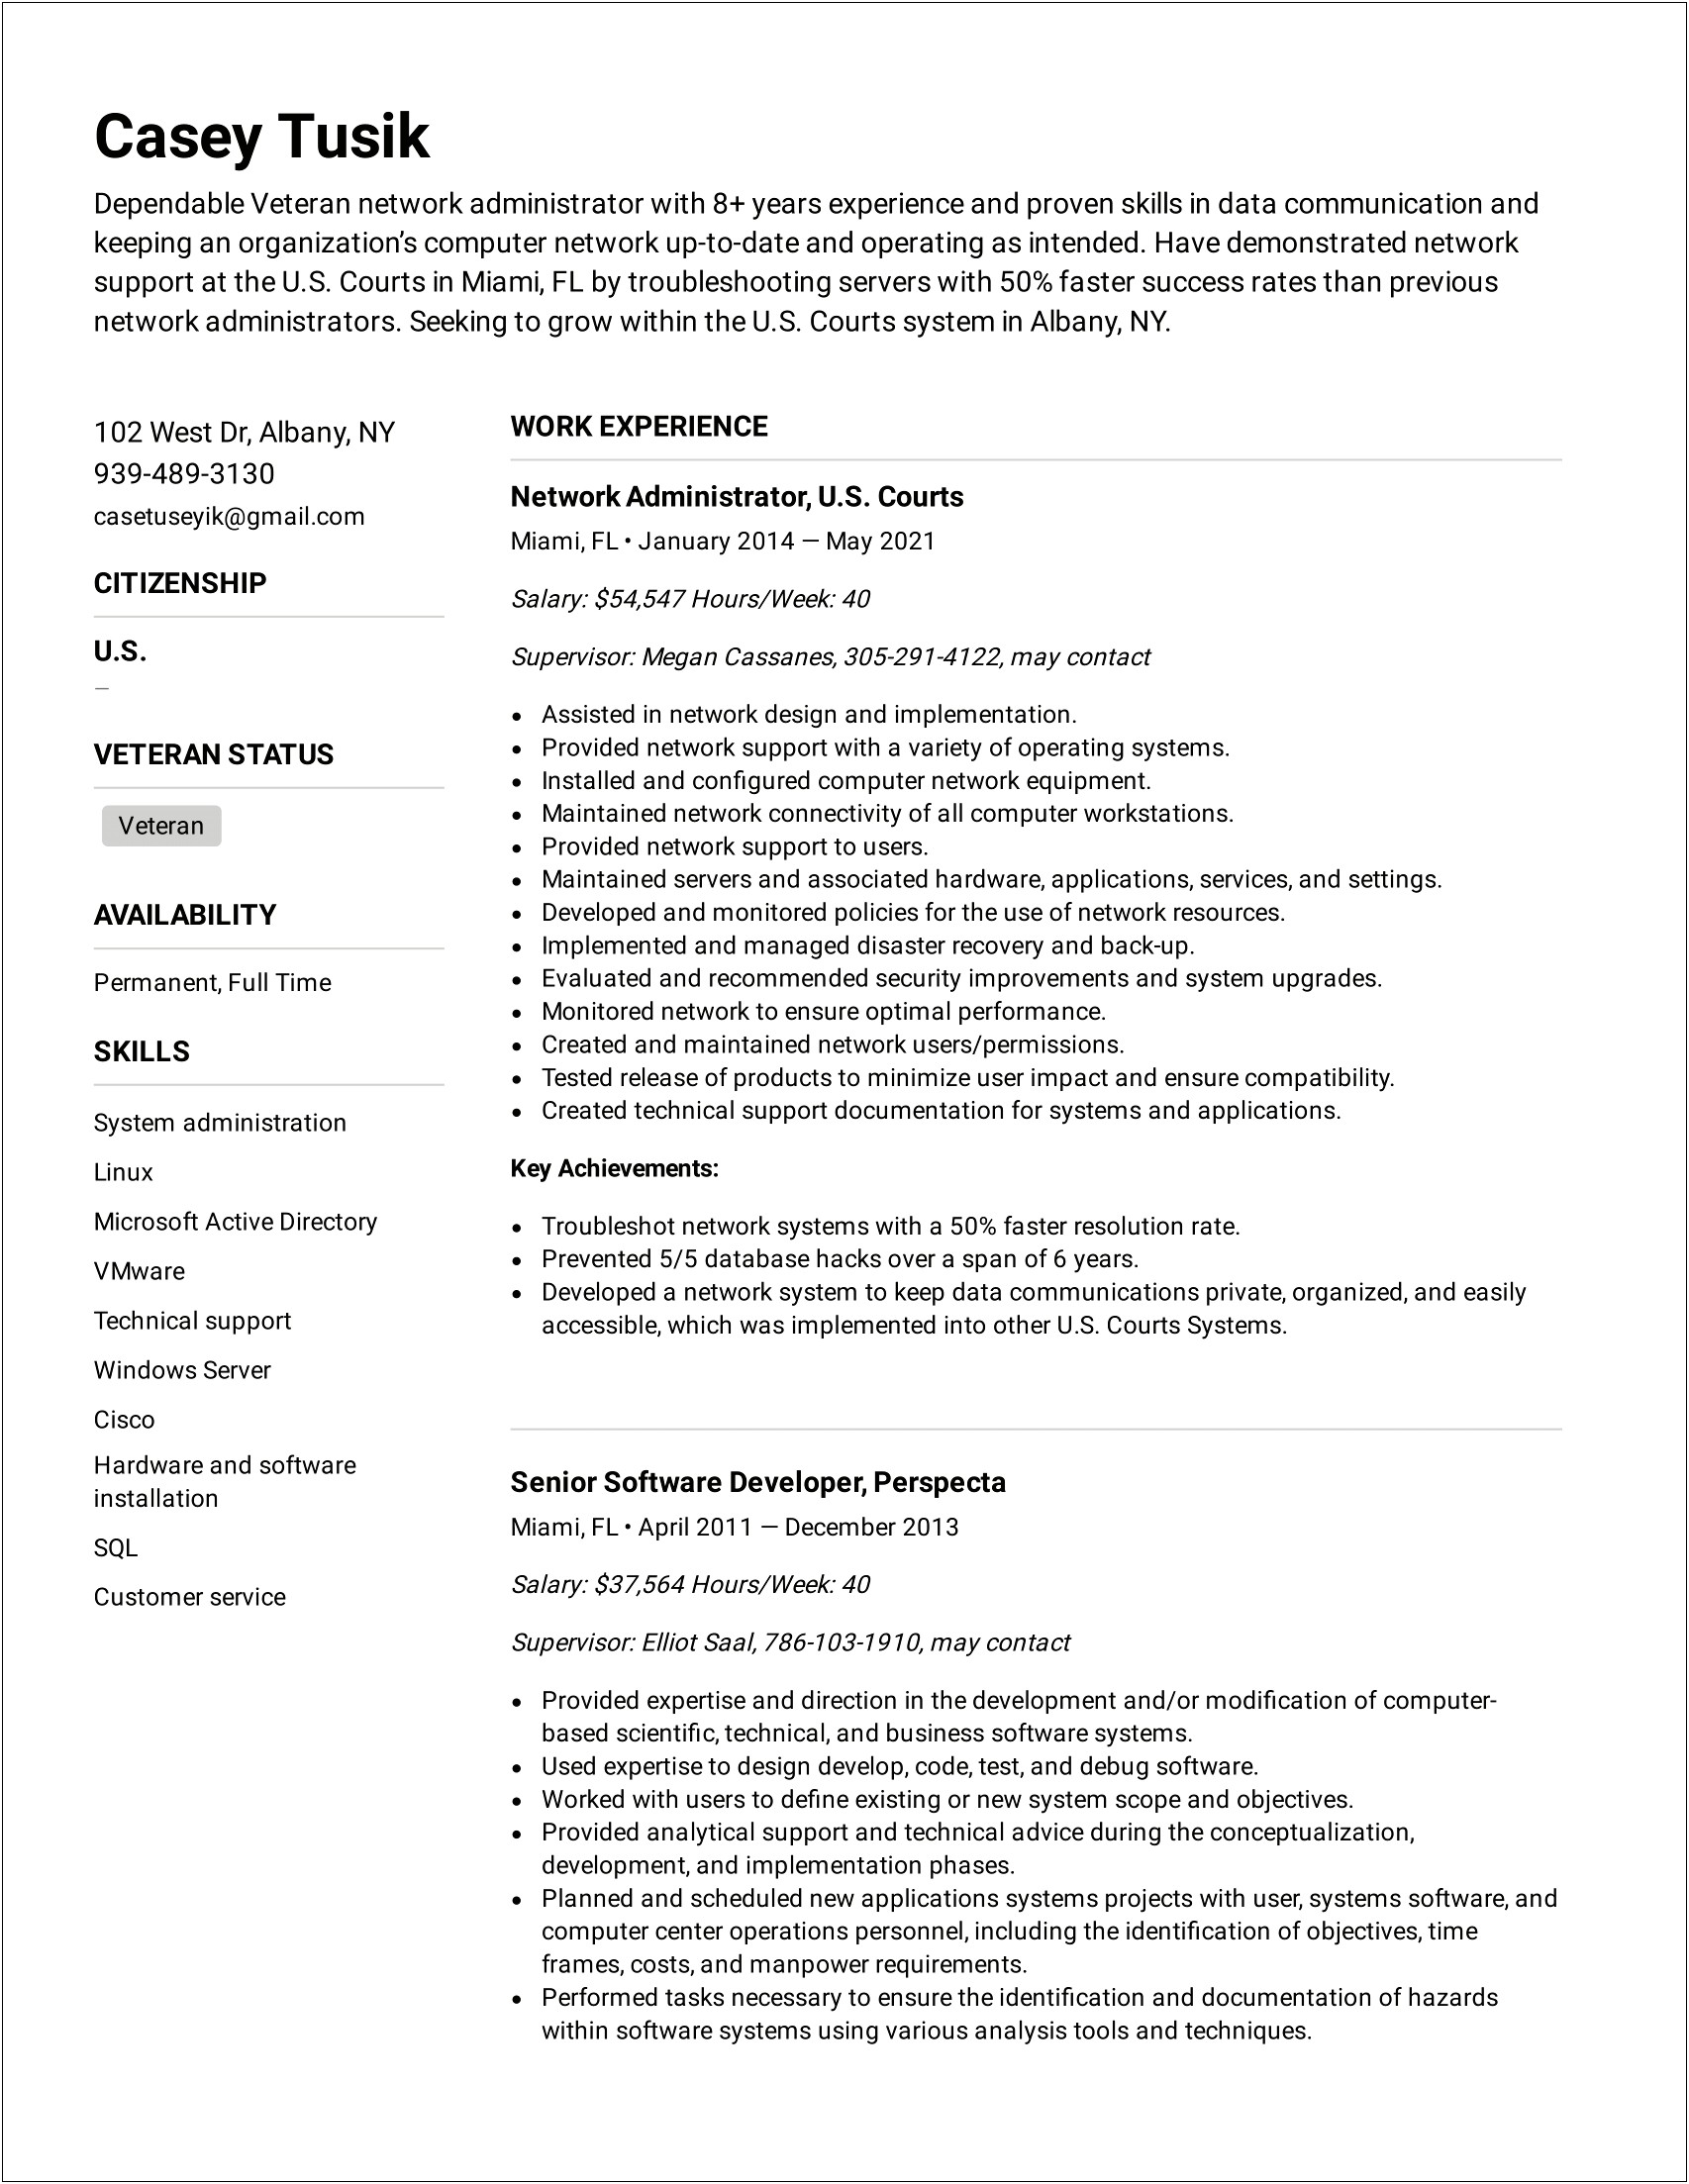 Where To Put Citizenship In Resume